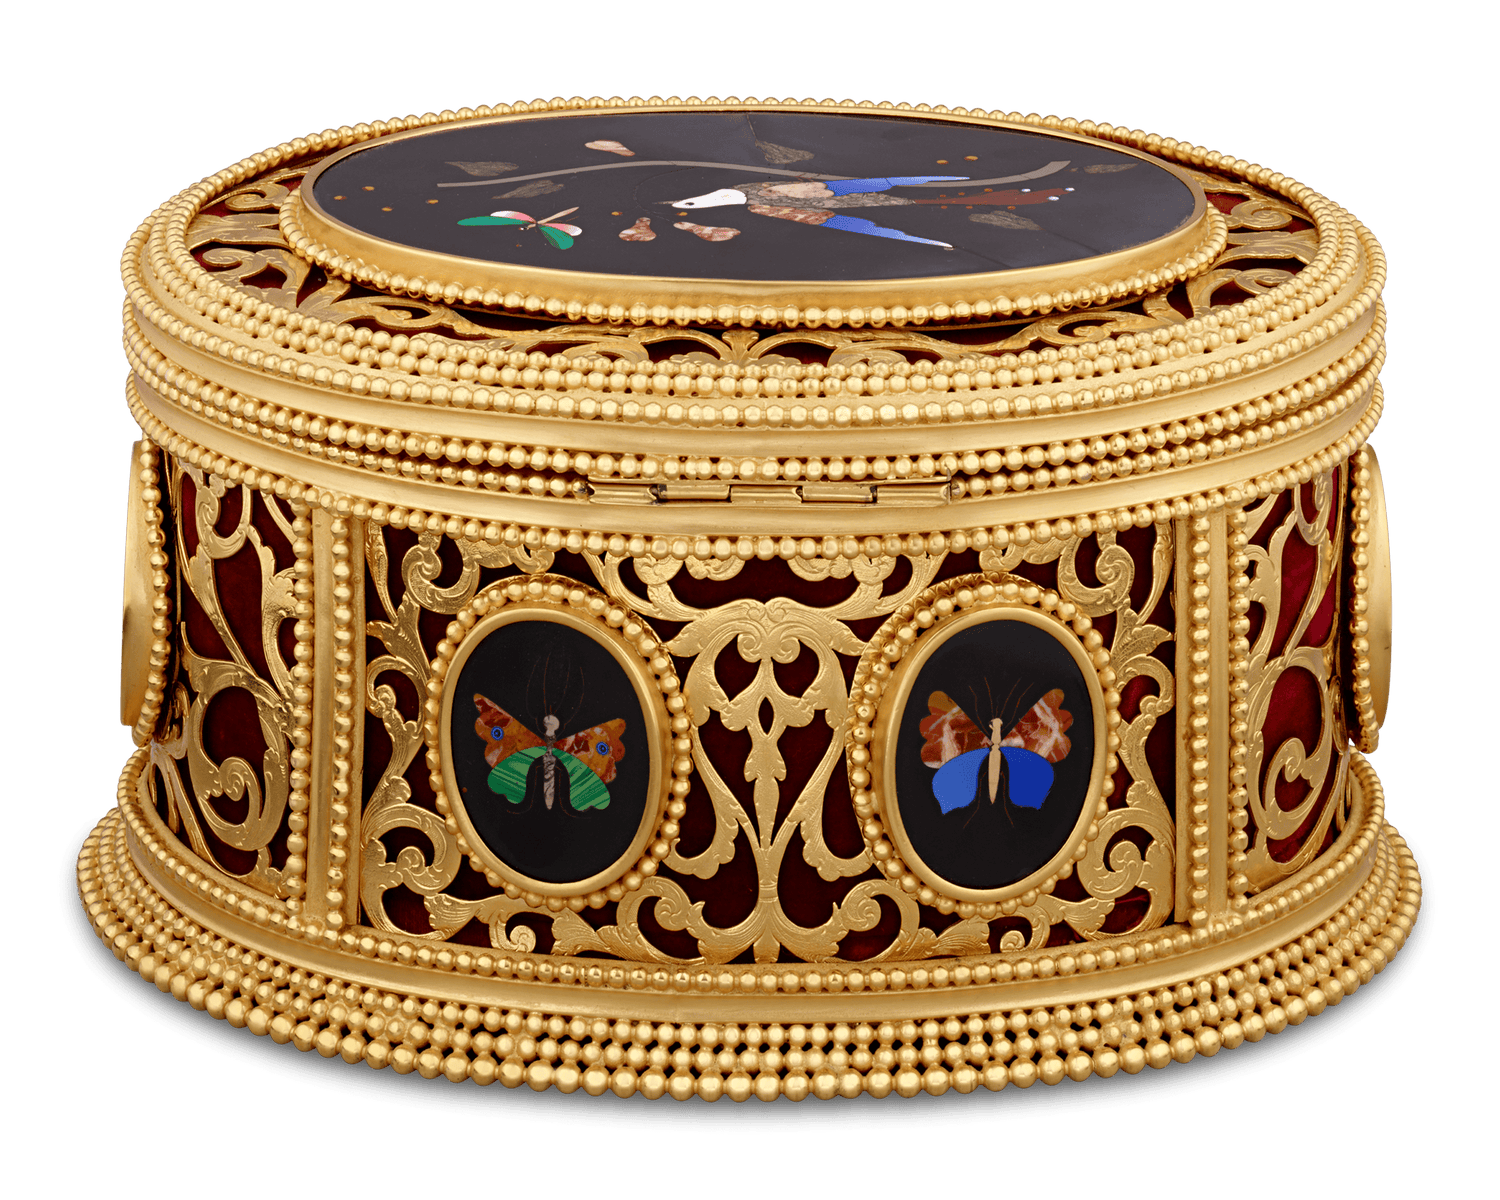 Pietre dure and doré bronze box by Tahan